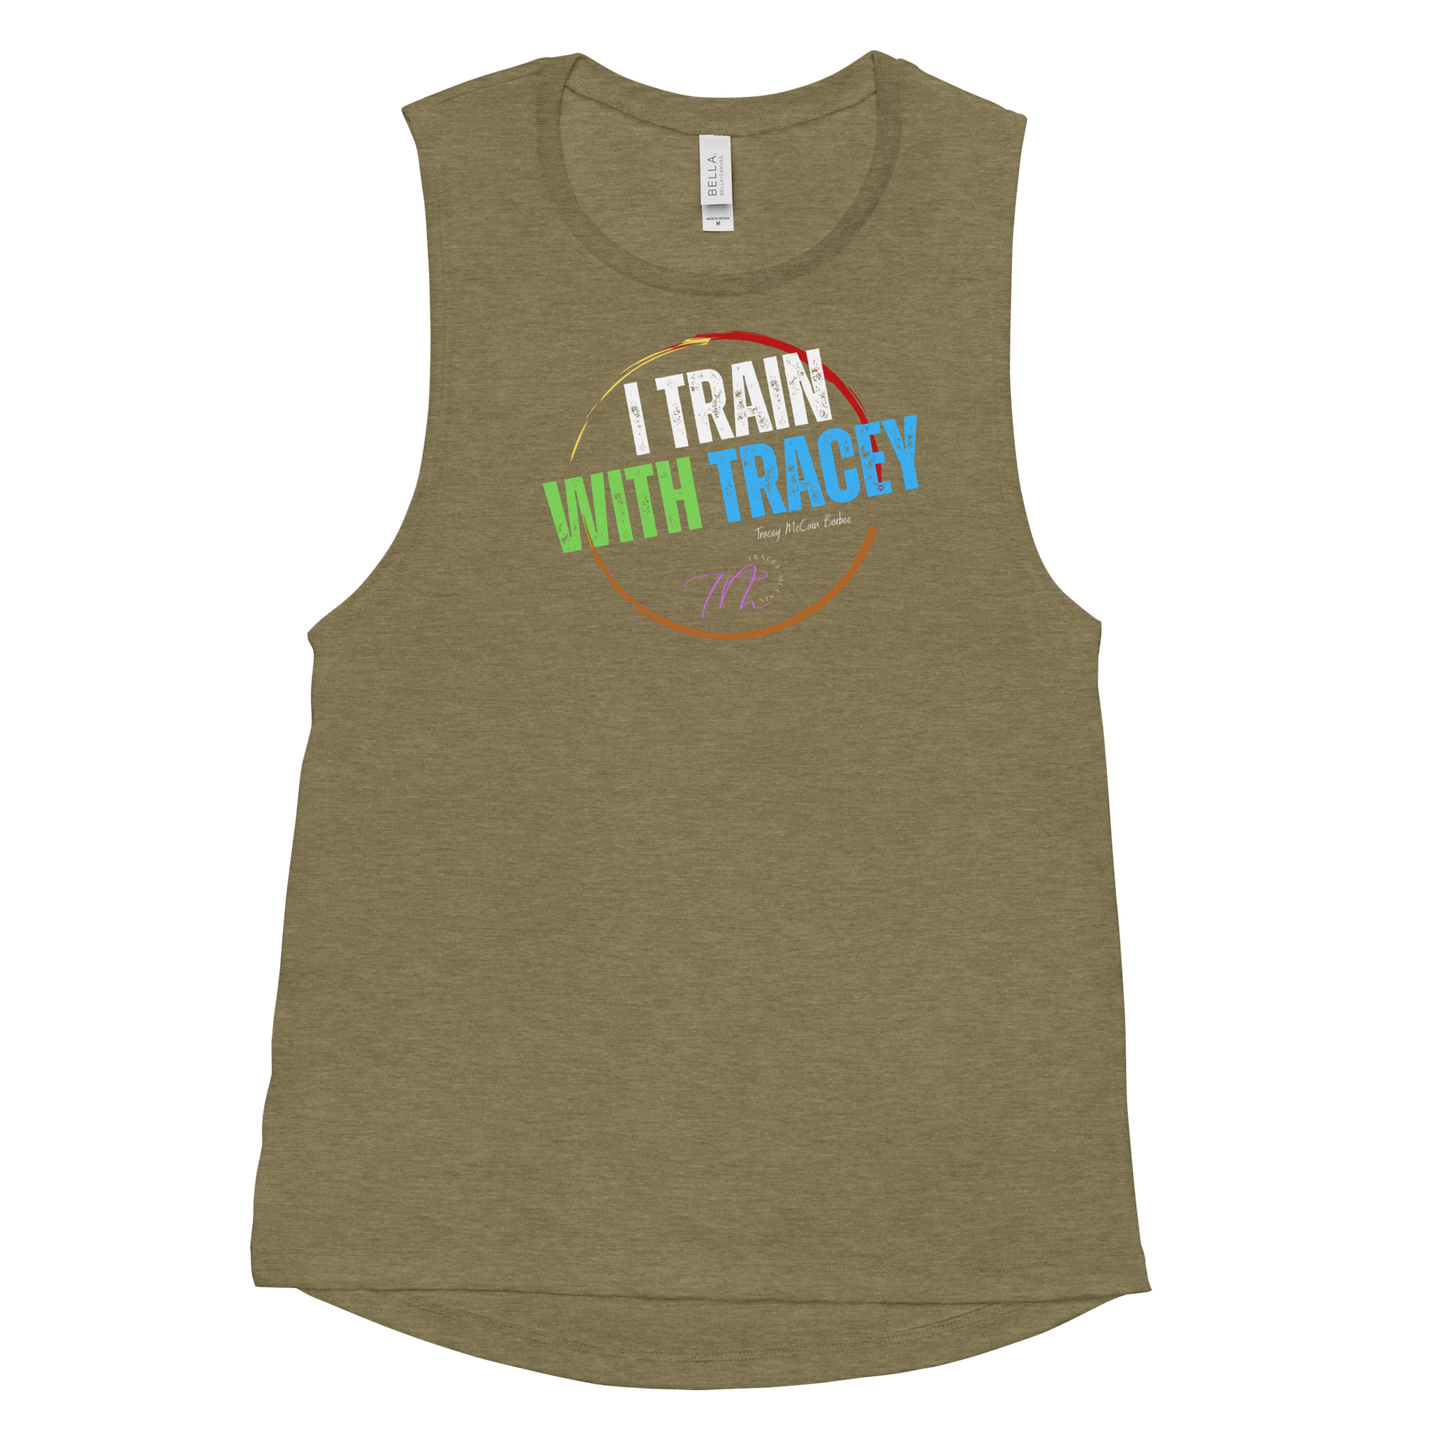 I Train wit Tracey Ladies’ Muscle Tank